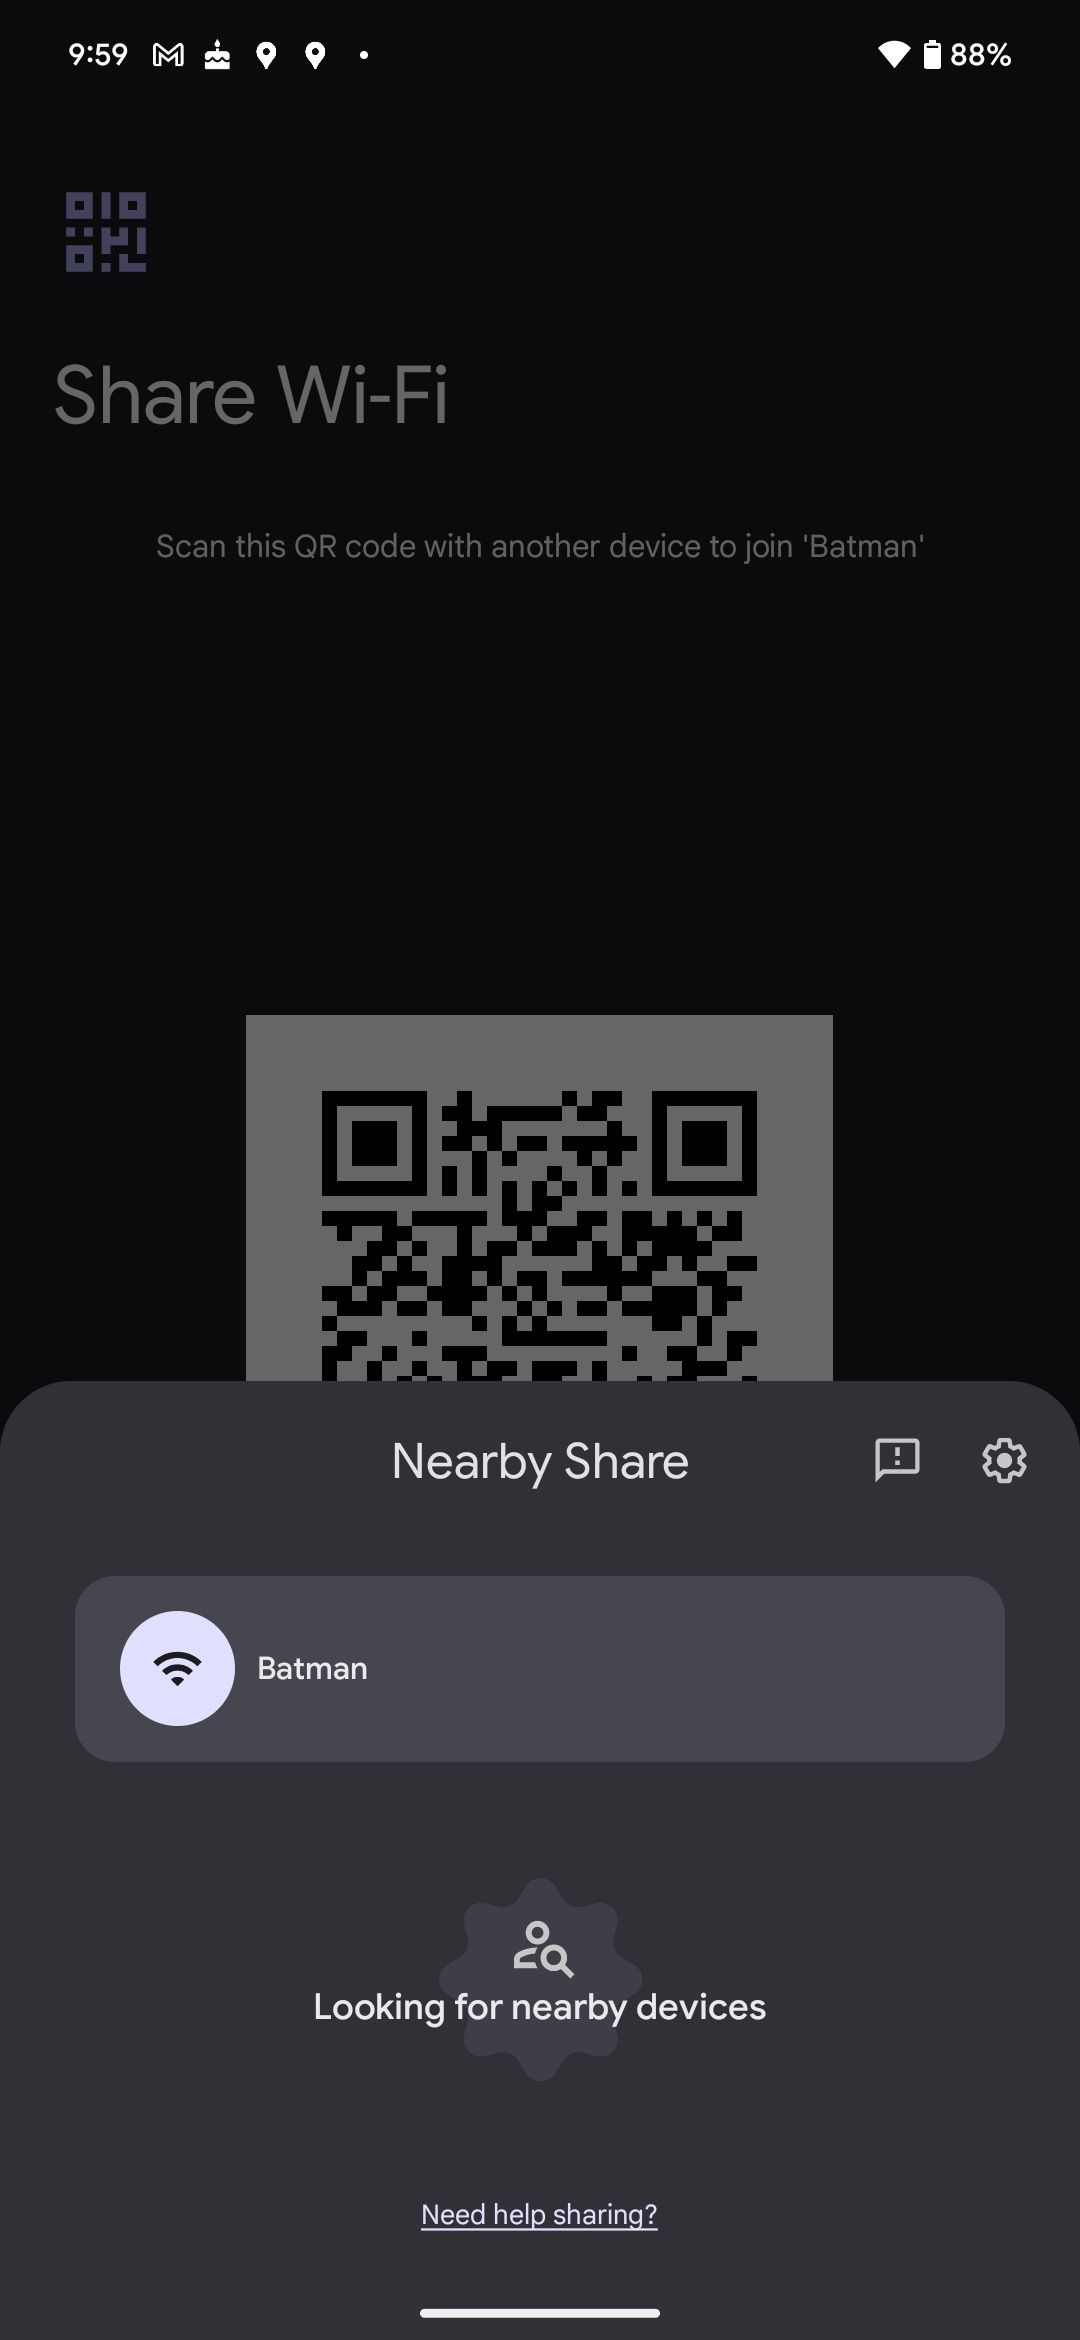 Wi-Fi password sharing using Nearby Share